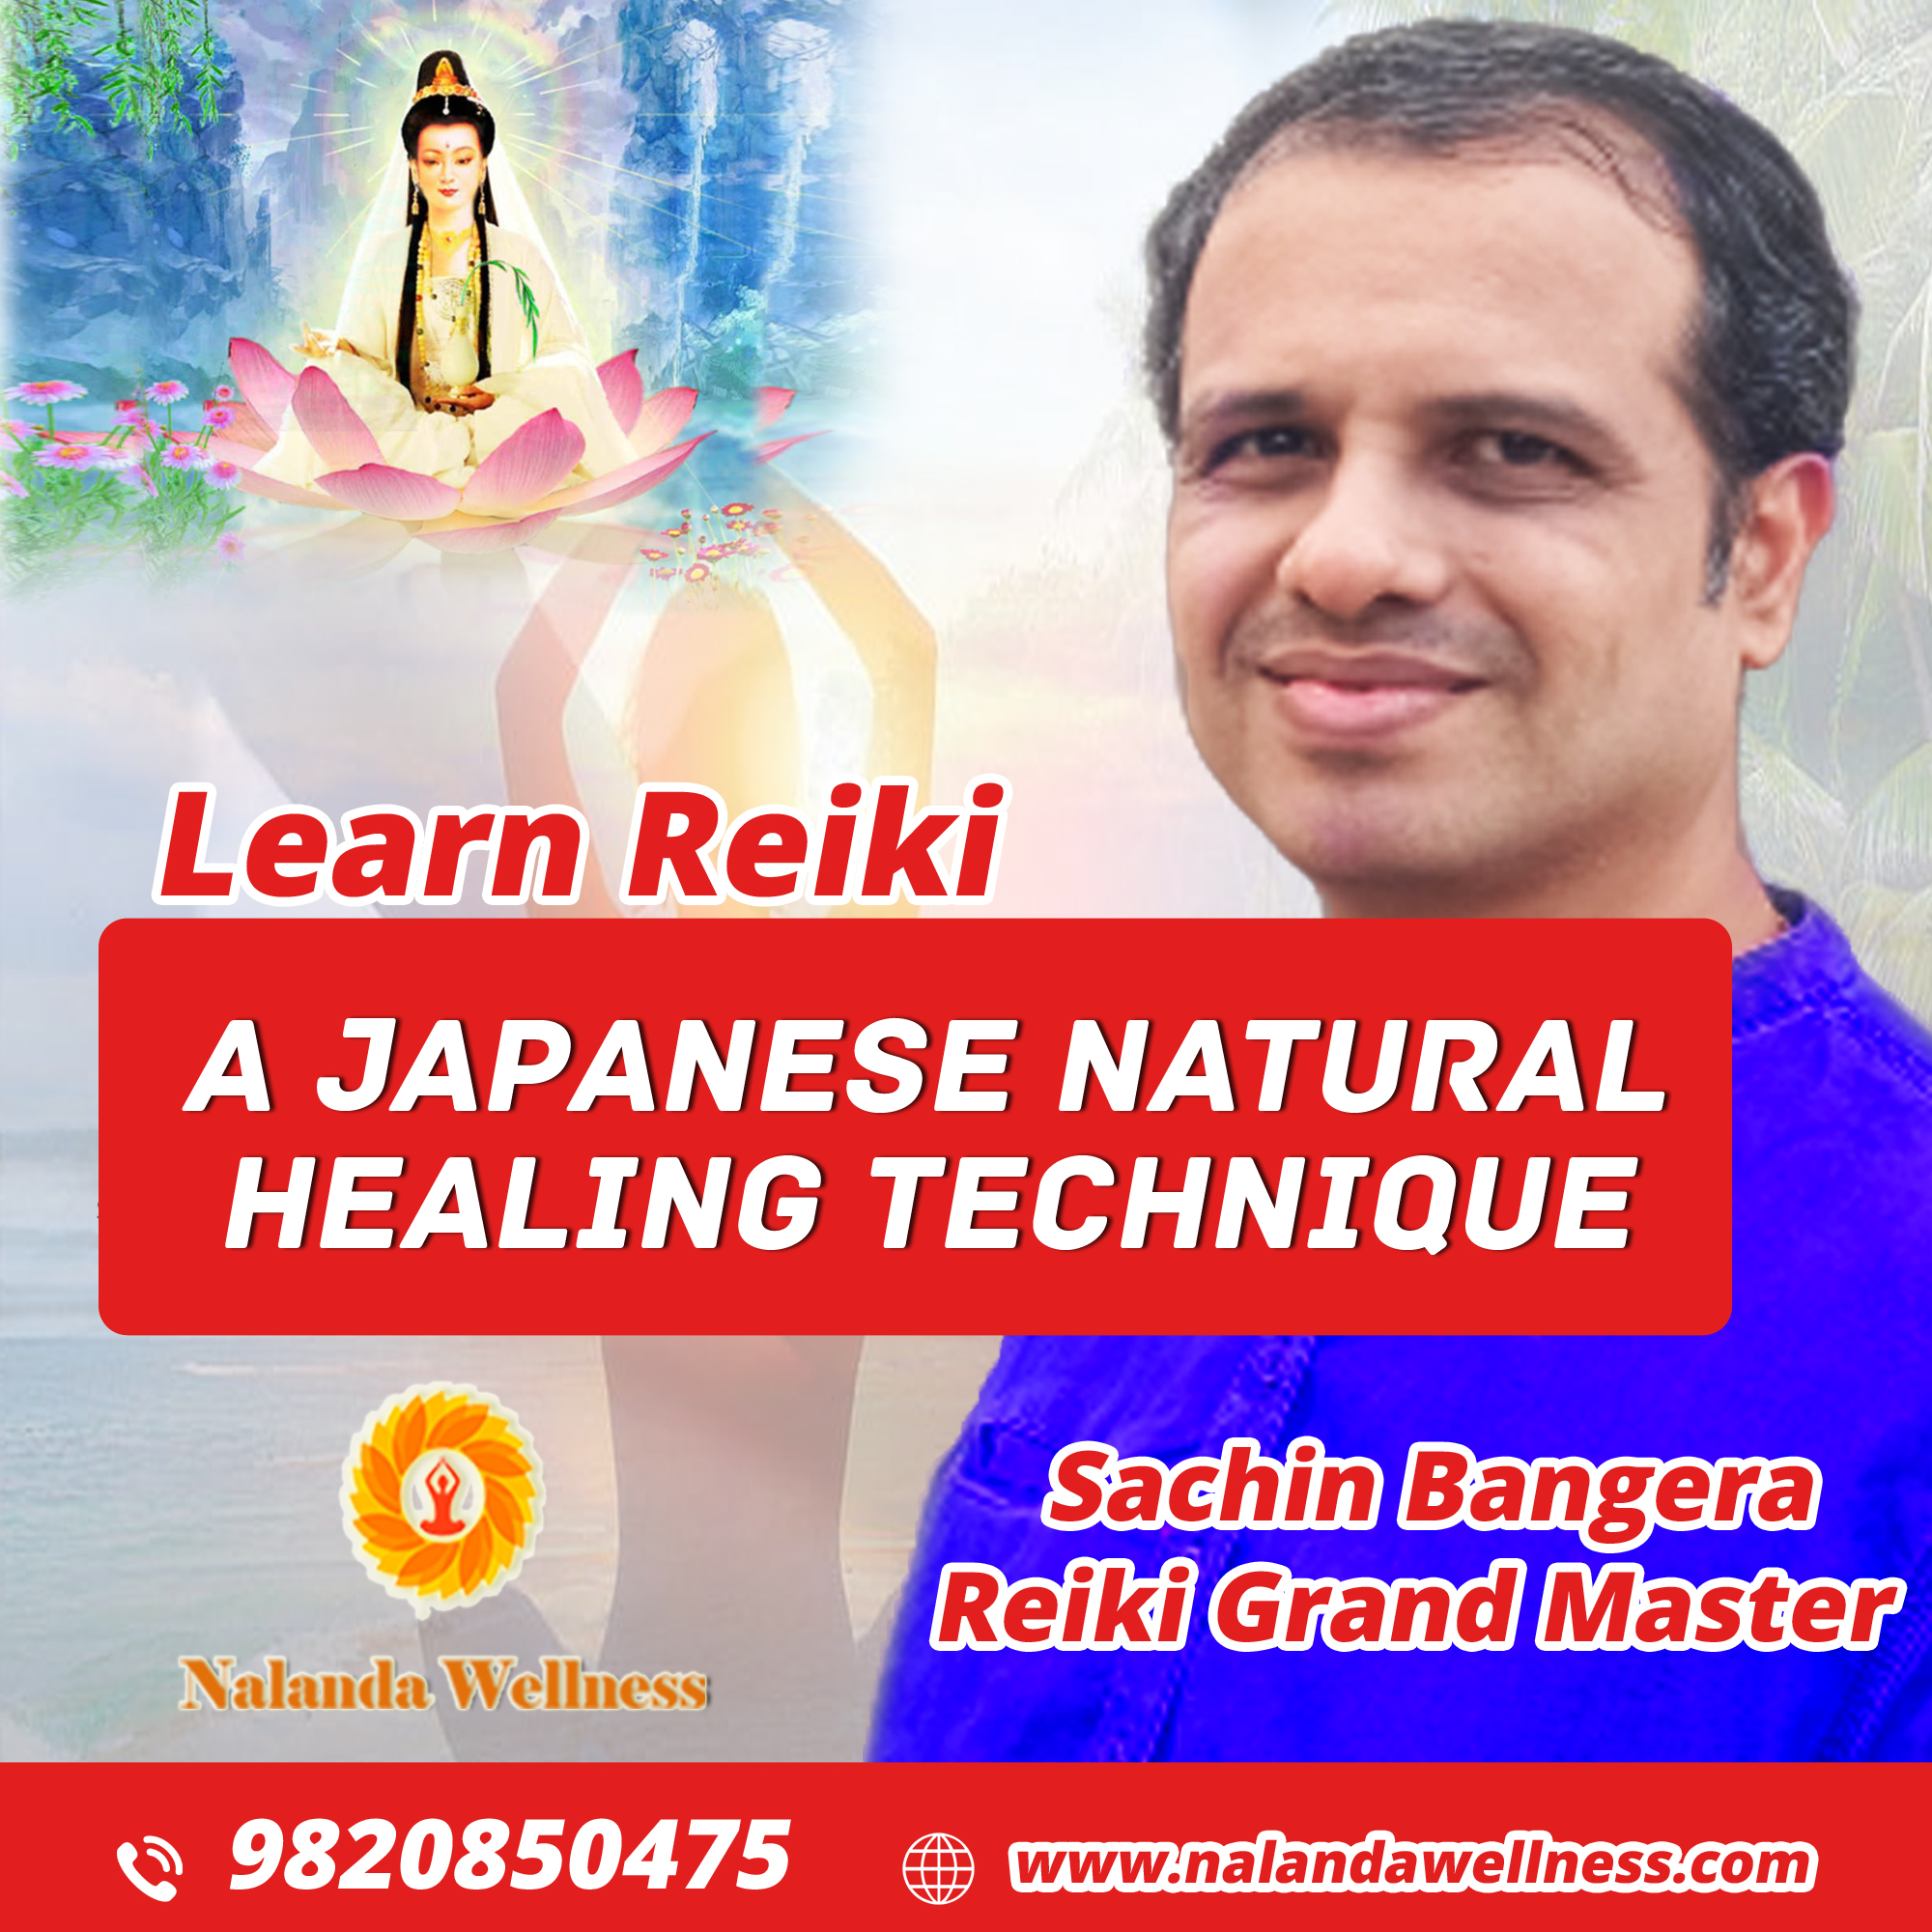 Reiki Grand Master Training: Take Your Healing Journey to the Next Level